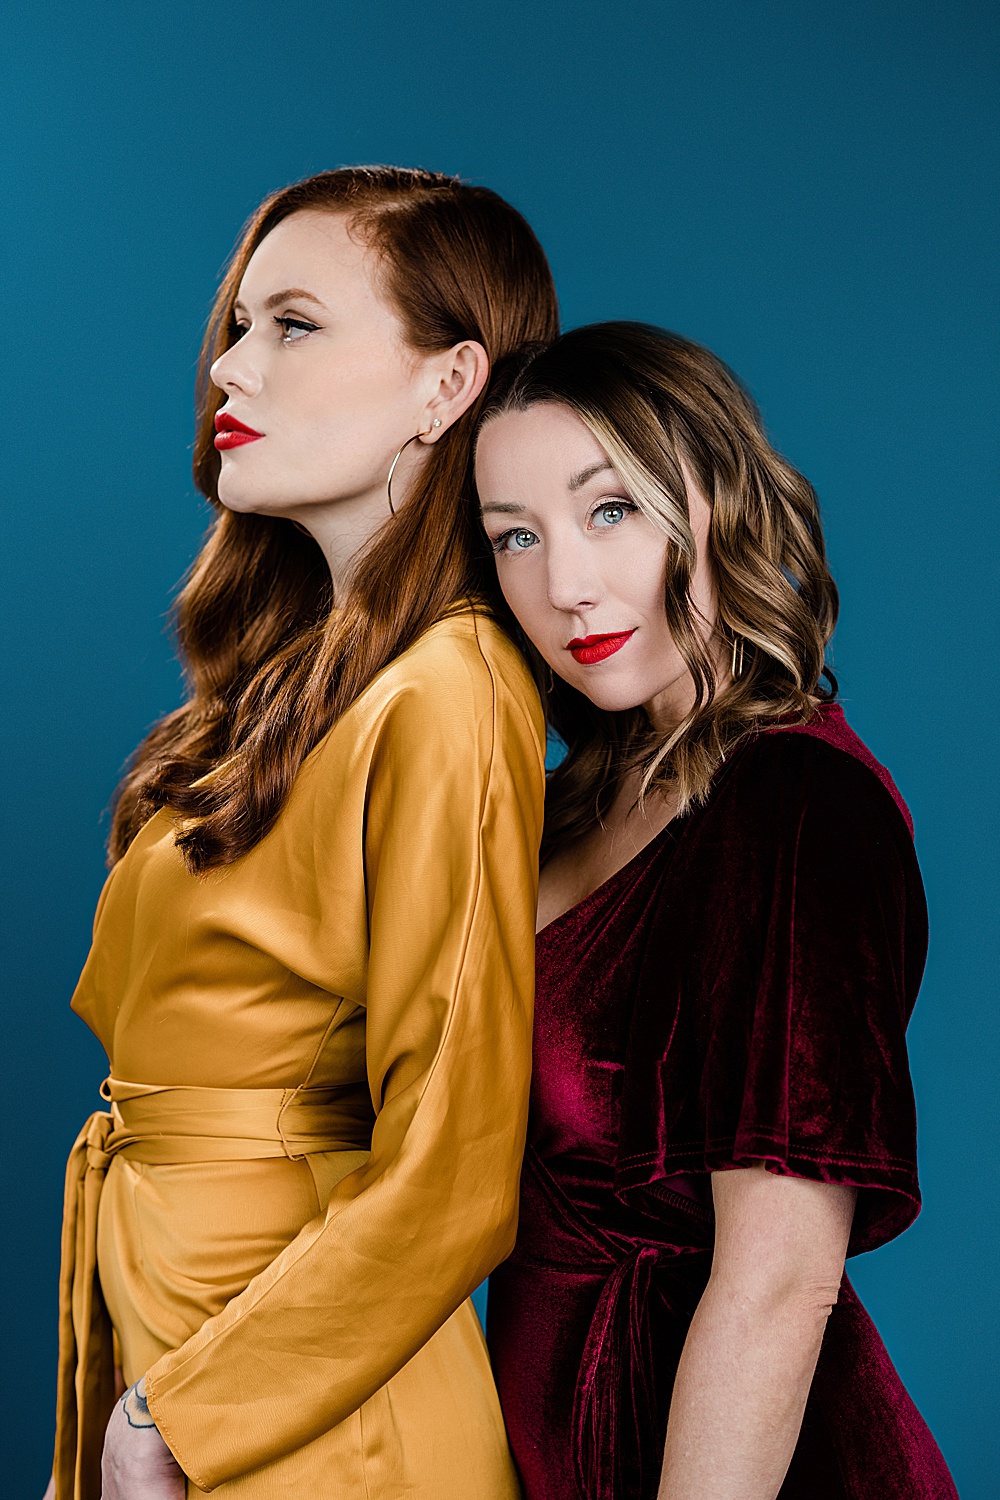 Lansing, Michigan commercial fashion photography, photo of two models - one in a yellow dress and one in a red velvet dress on a seamless blue backdrop by Allie Siarto & Co., Lansing commercial photographer